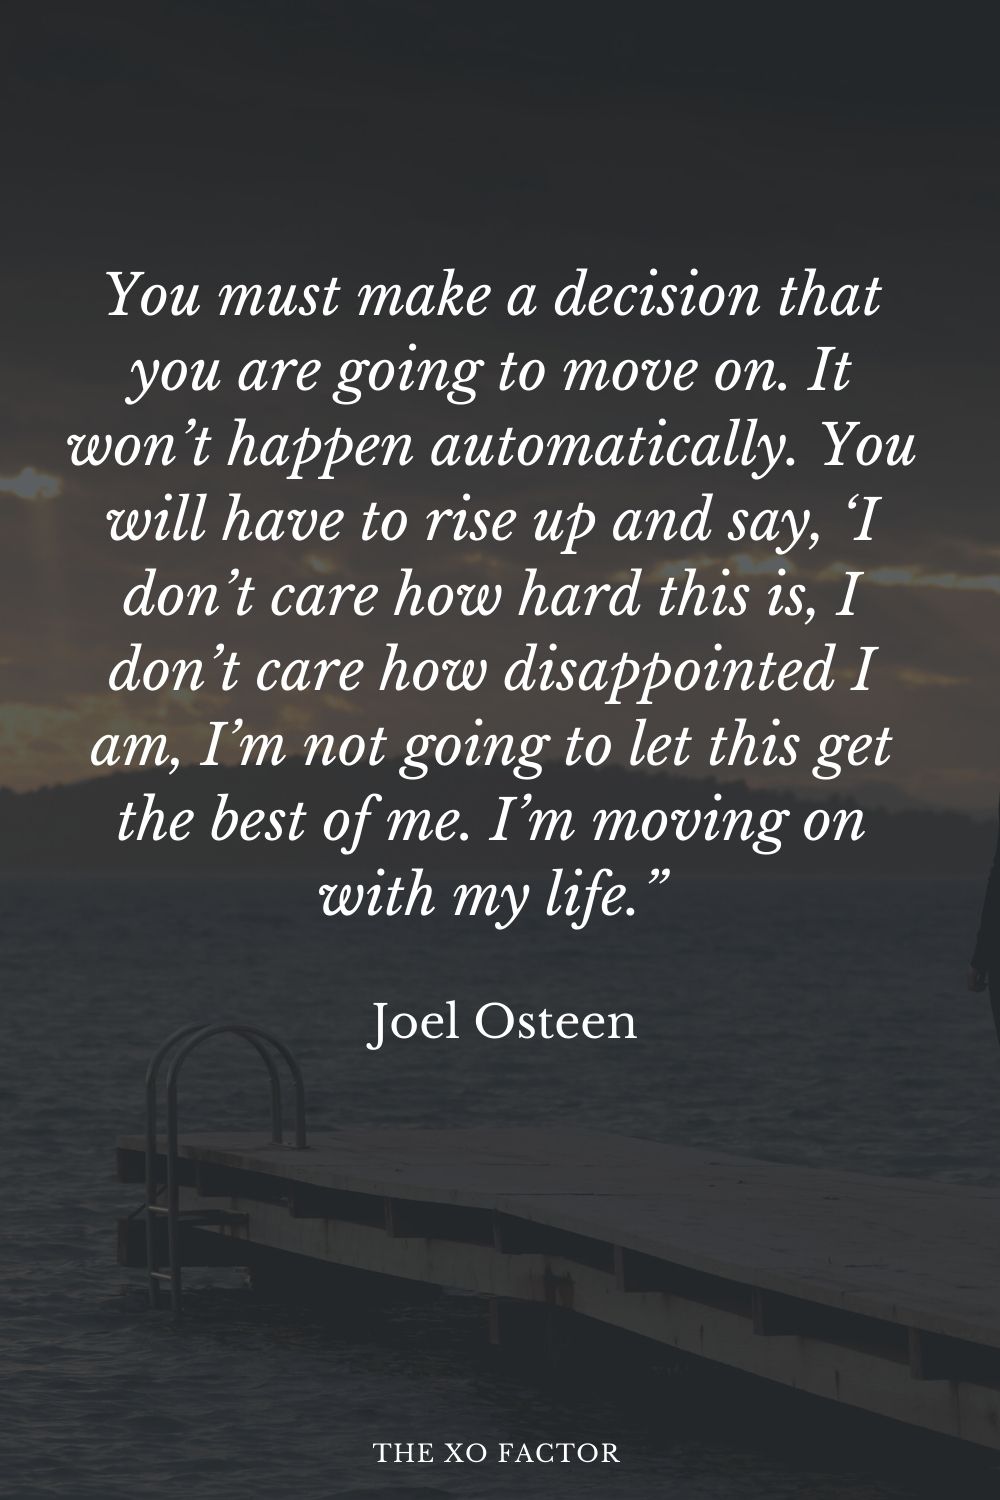 You must make a decision that you are going to move on. It won’t happen automatically. You will have to rise up and say, ‘I don’t care how hard this is, I don’t care how disappointed I am, I’m not going to let this get the best of me. I’m moving on with my life.” Joel Osteen